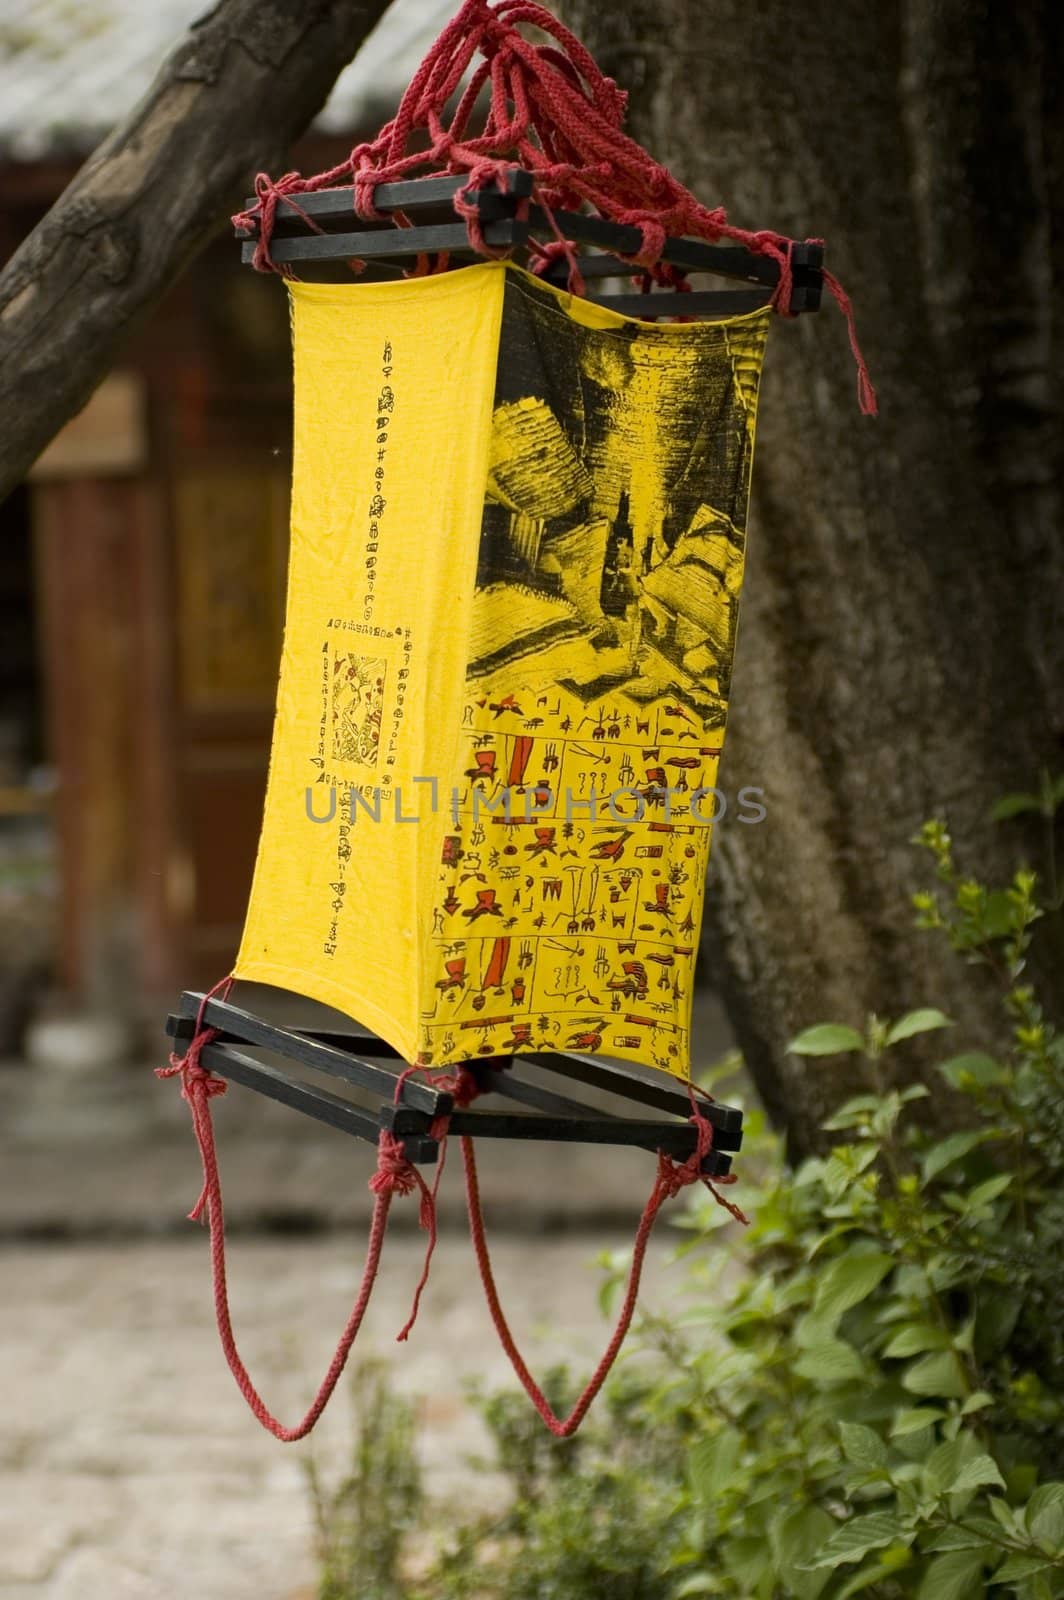 Special, decorative Chinese lantern hanged on tree in Lijiang old town, Yunnan province, China.